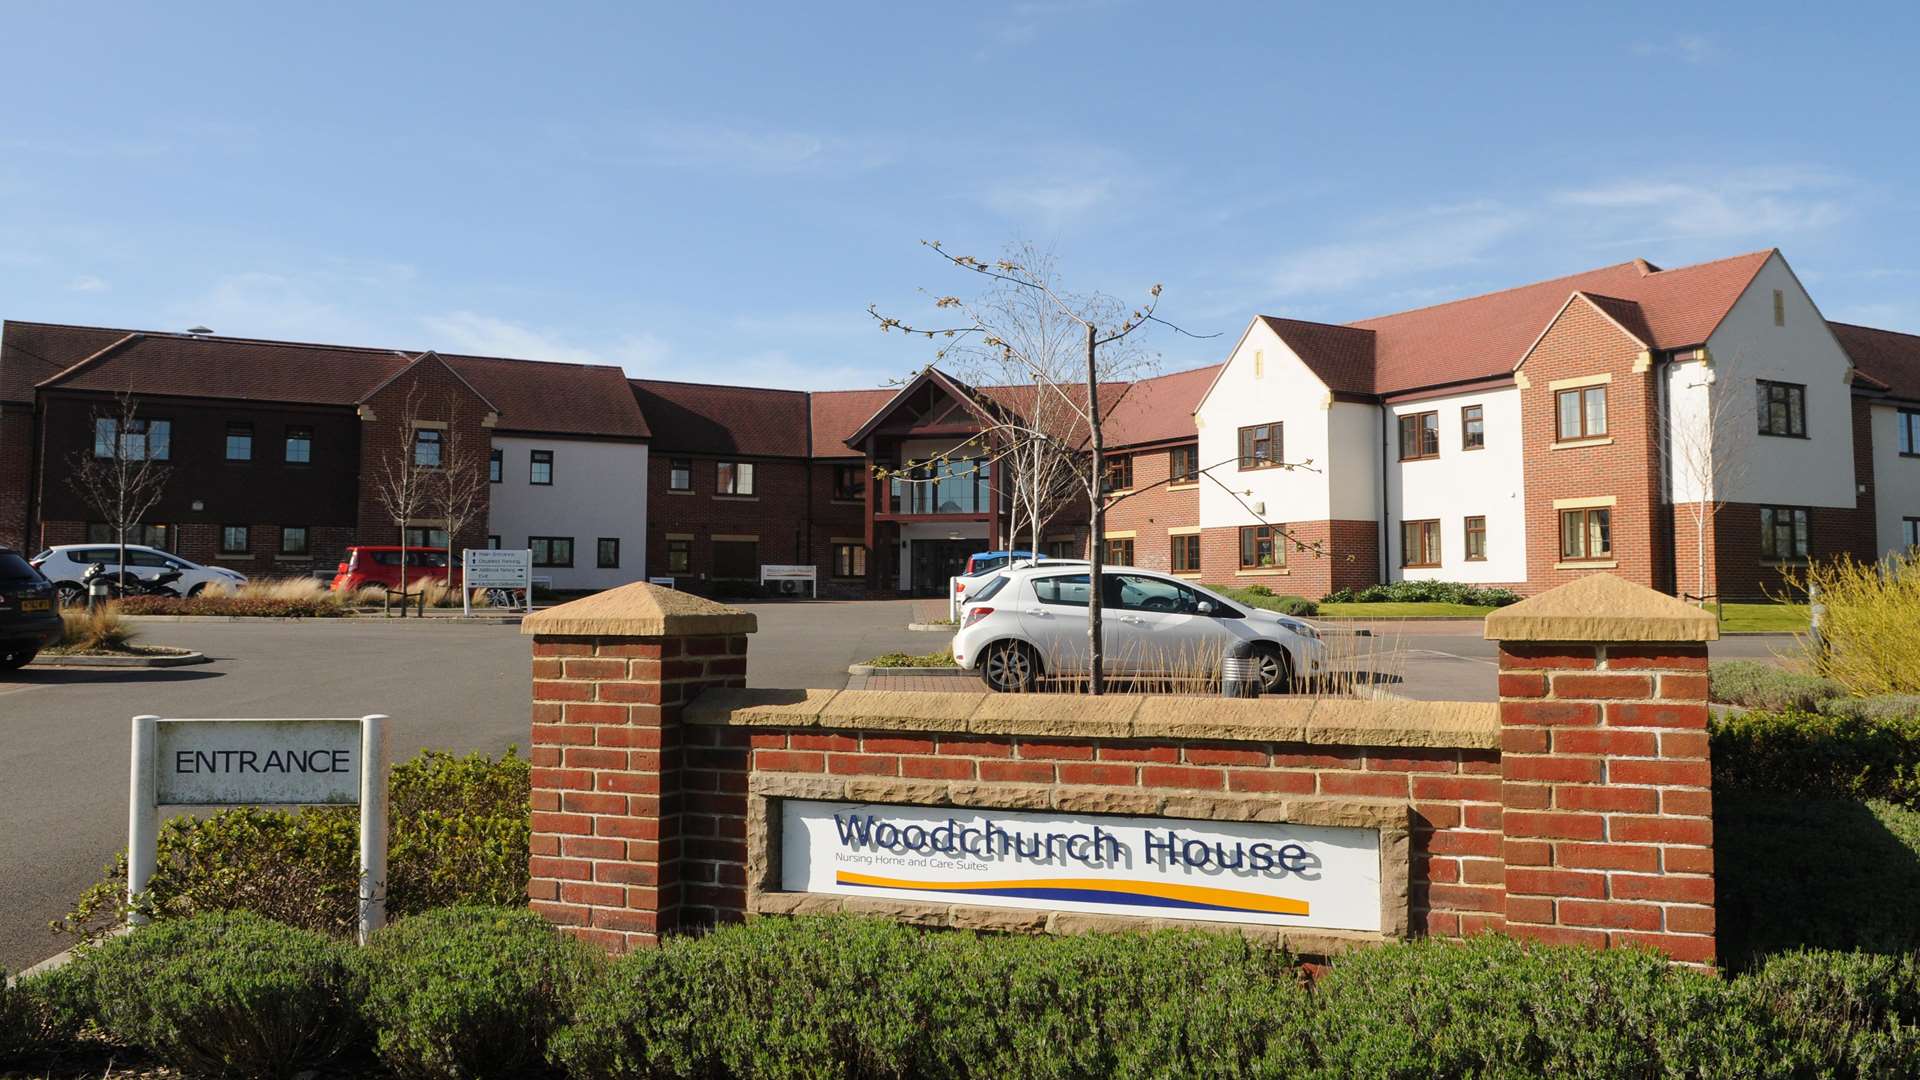 The home was deemed 'inadequate' in a CQC report